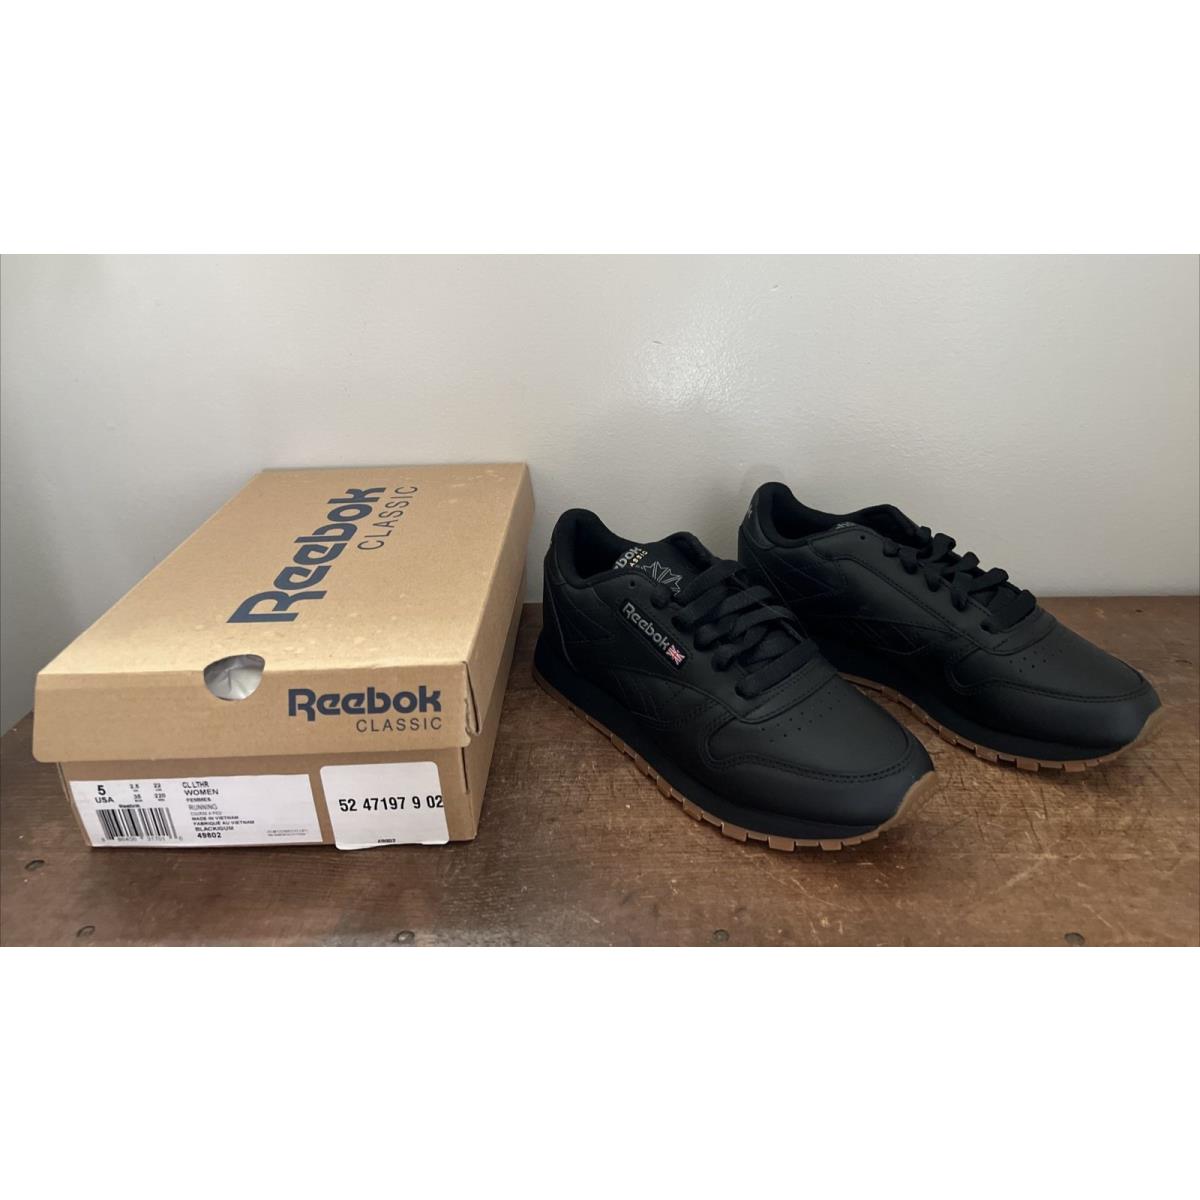 Reebok Classic Black Leather 49802 Womens Sneakers Shoes- Size 5